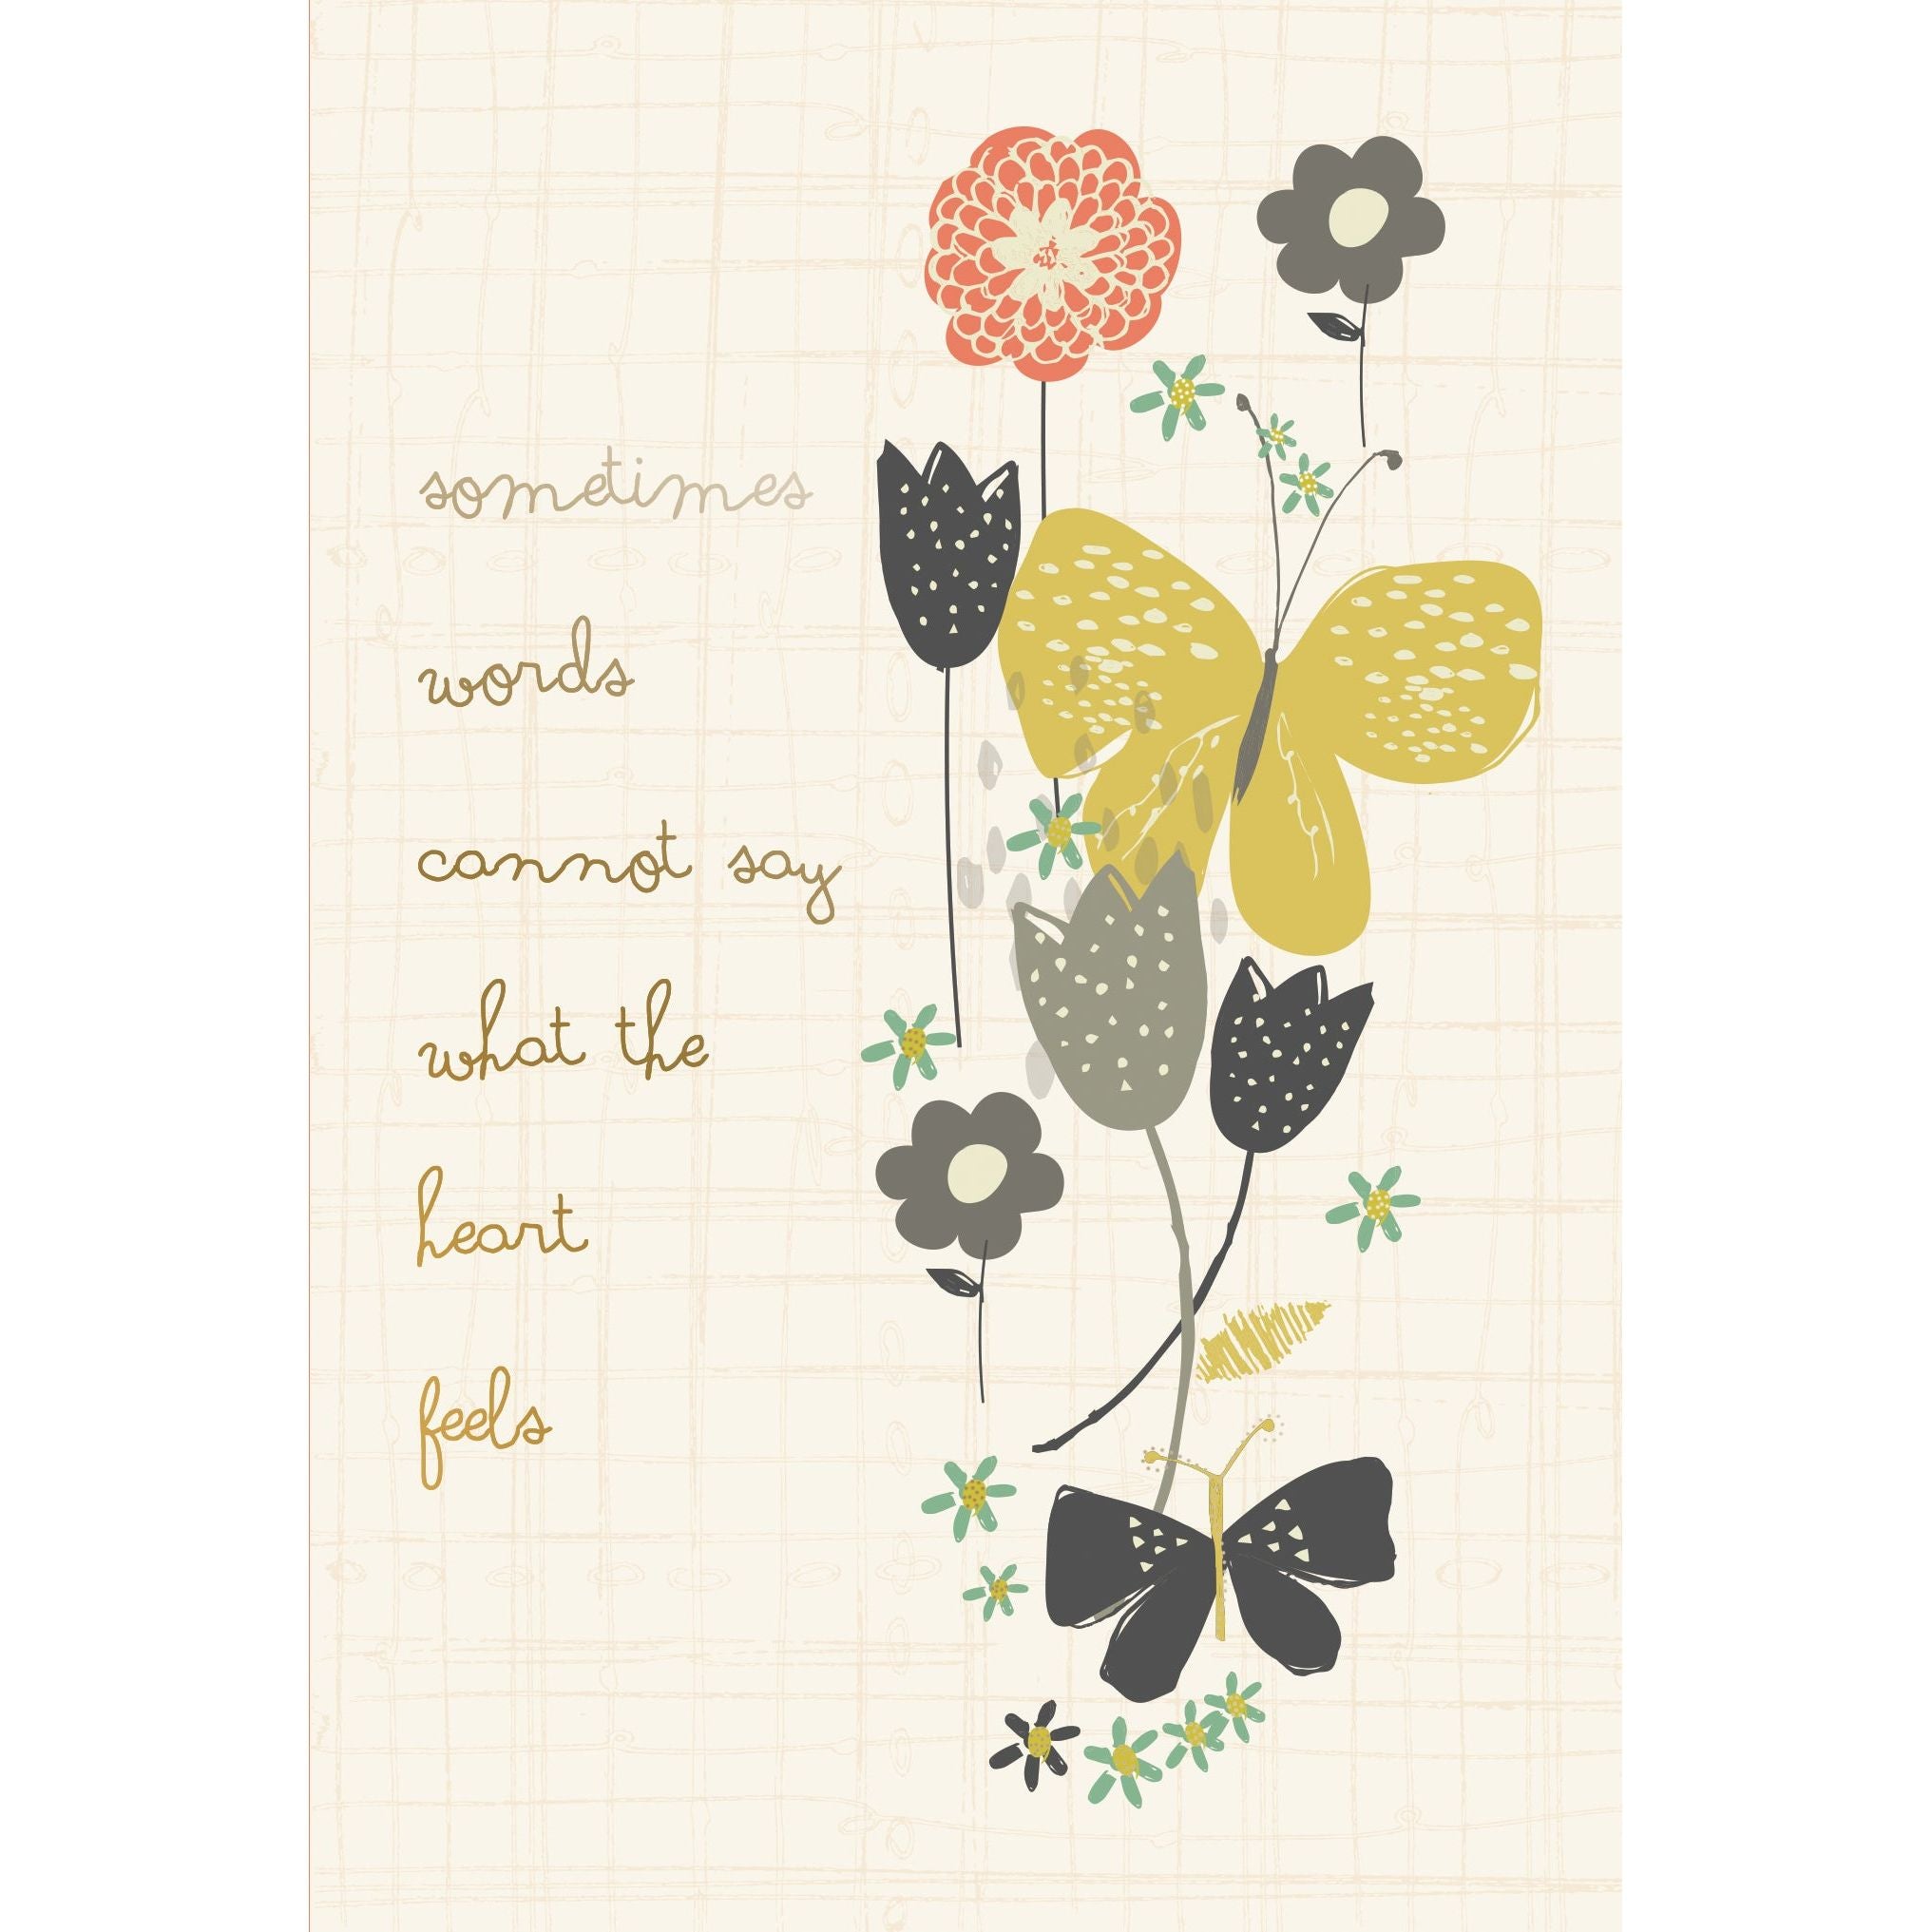 Comfort and Care, Caring thoughts Card - Cardmore